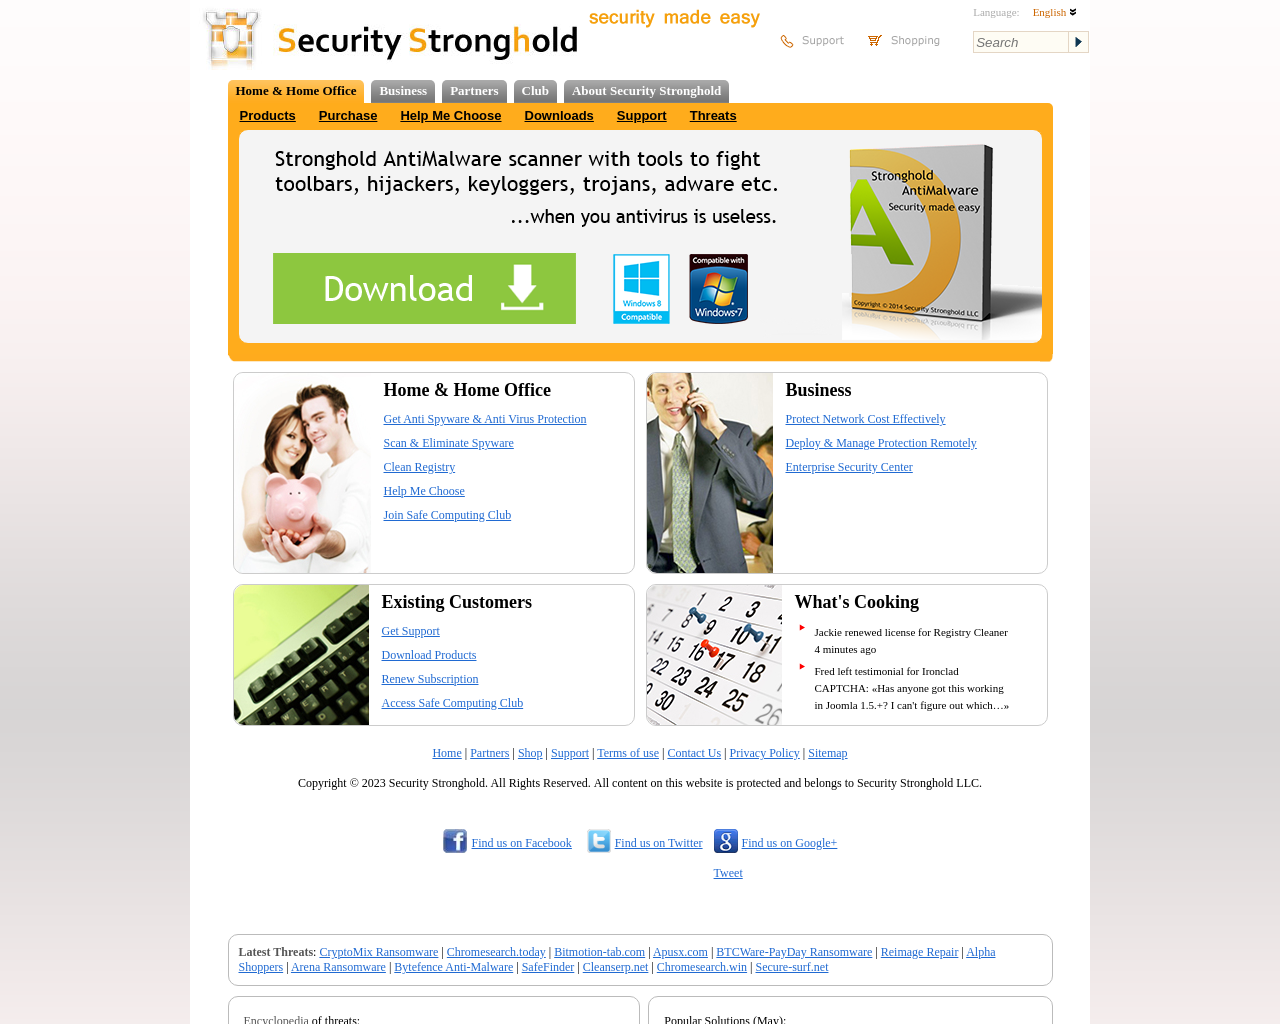 www.securitystronghold.com